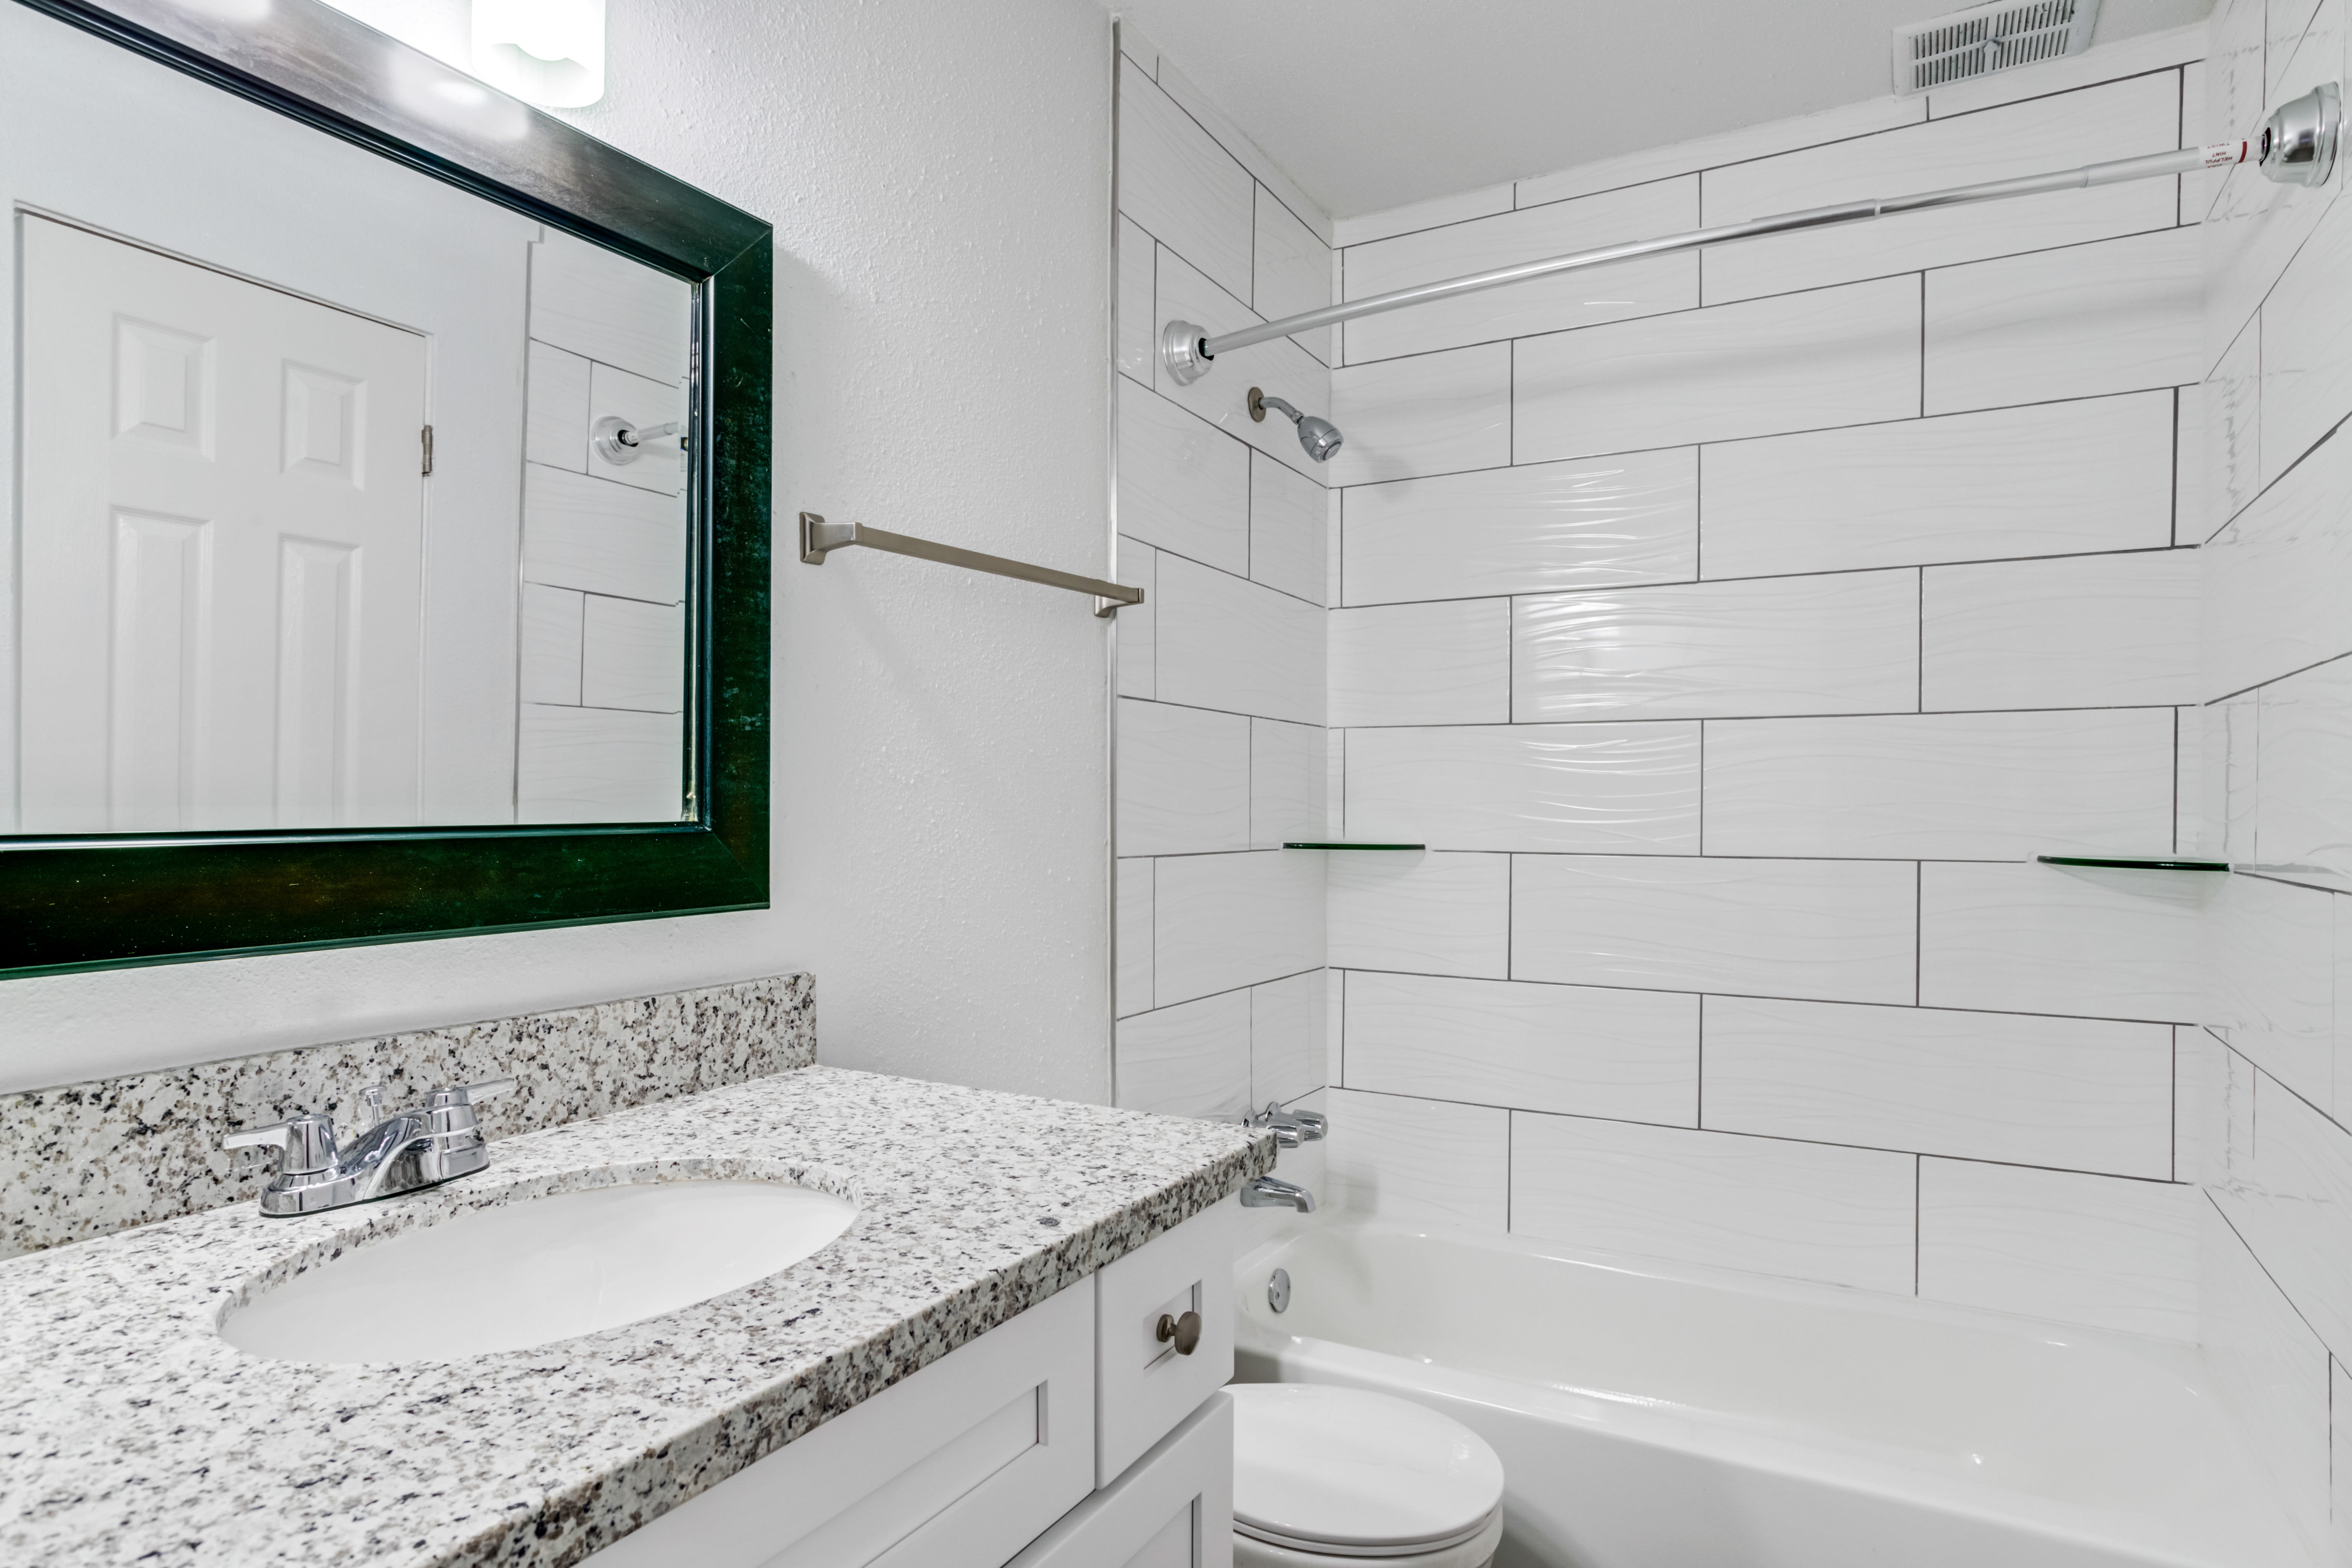 Bathroom with tile at Regents Walk in Houston, Texas